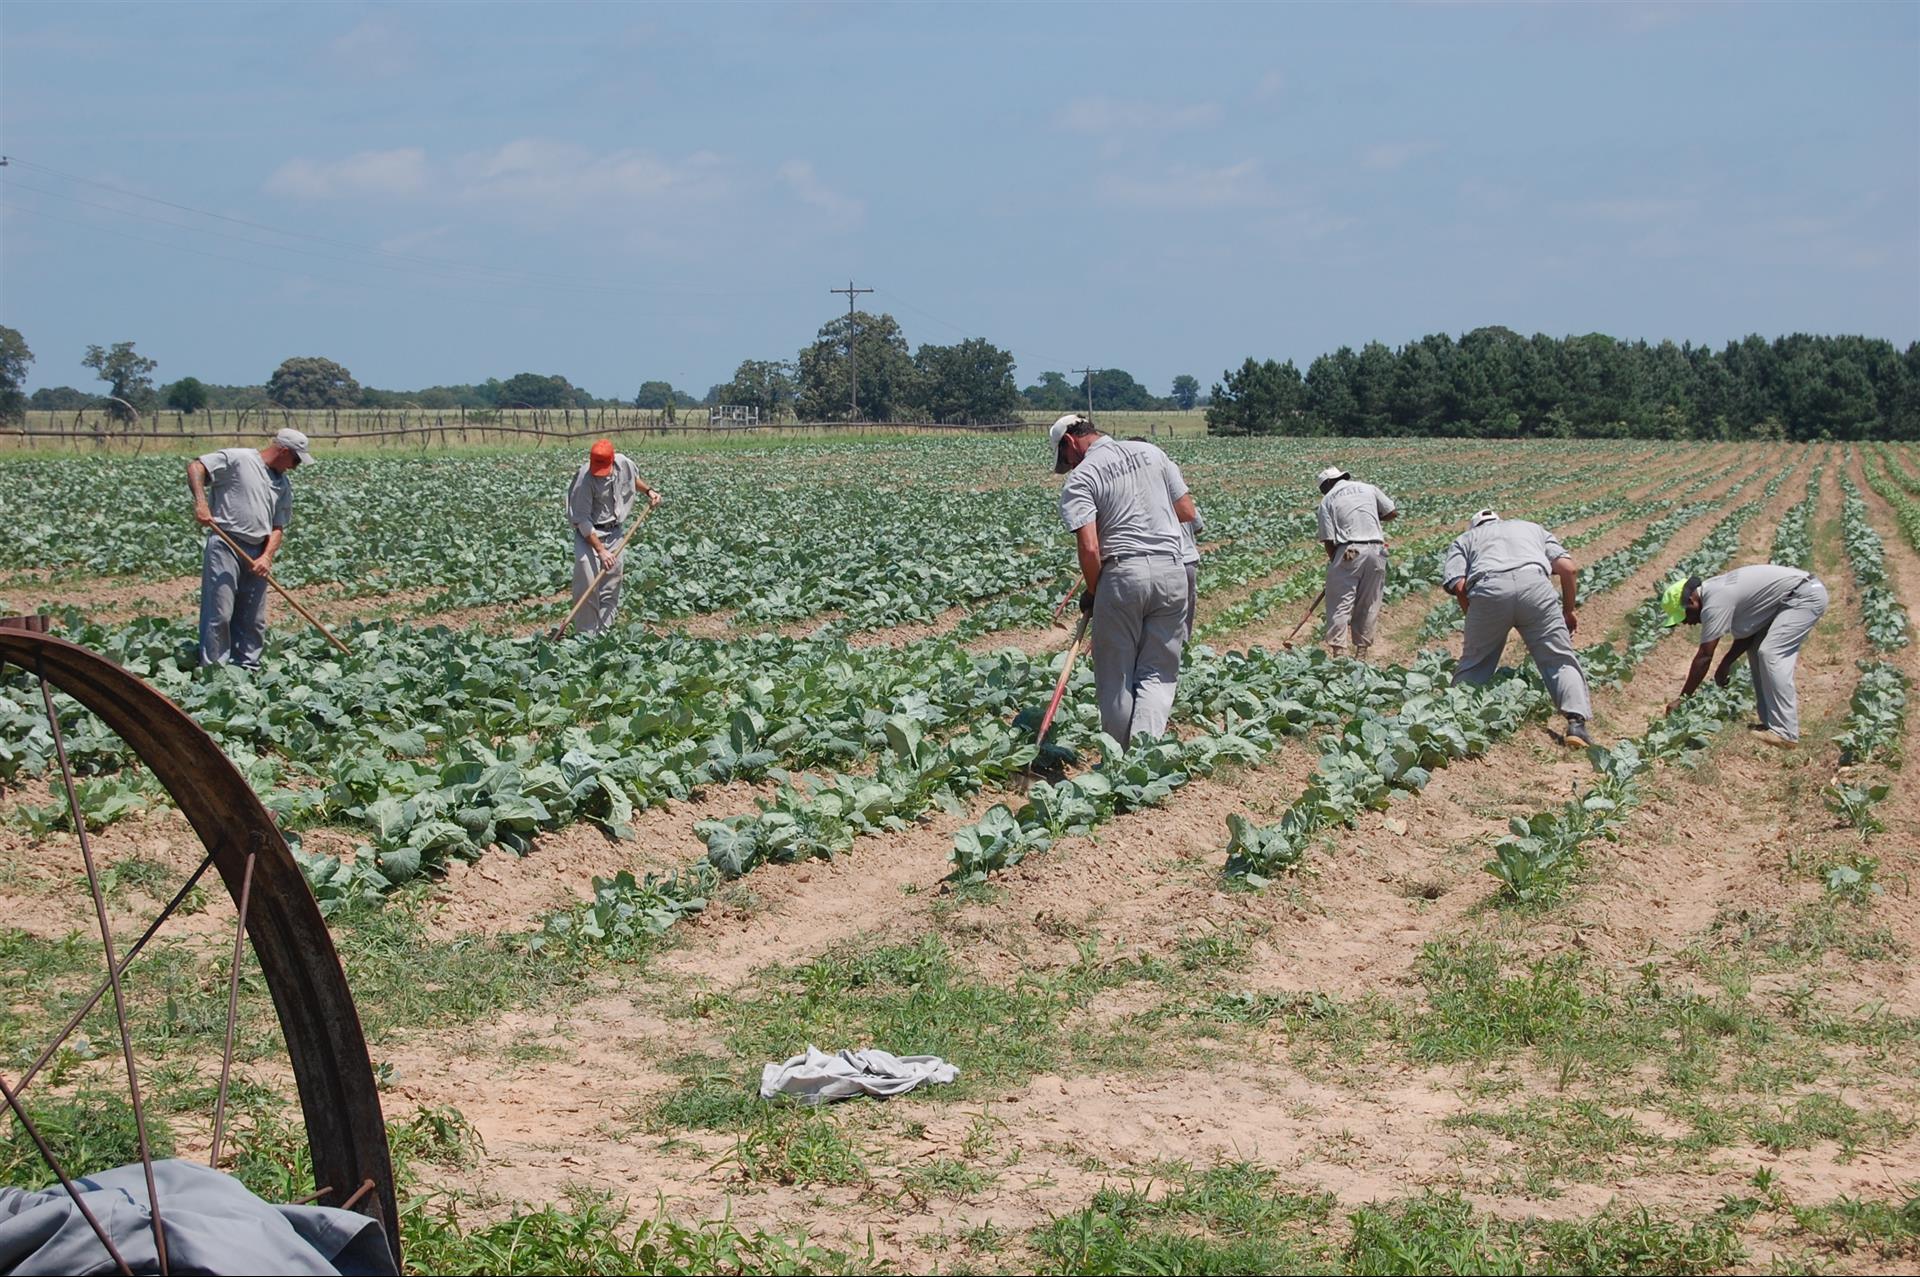 Inmates working in fields located at Howard McLeod Correctional Center in Atoka, Oklahoma.